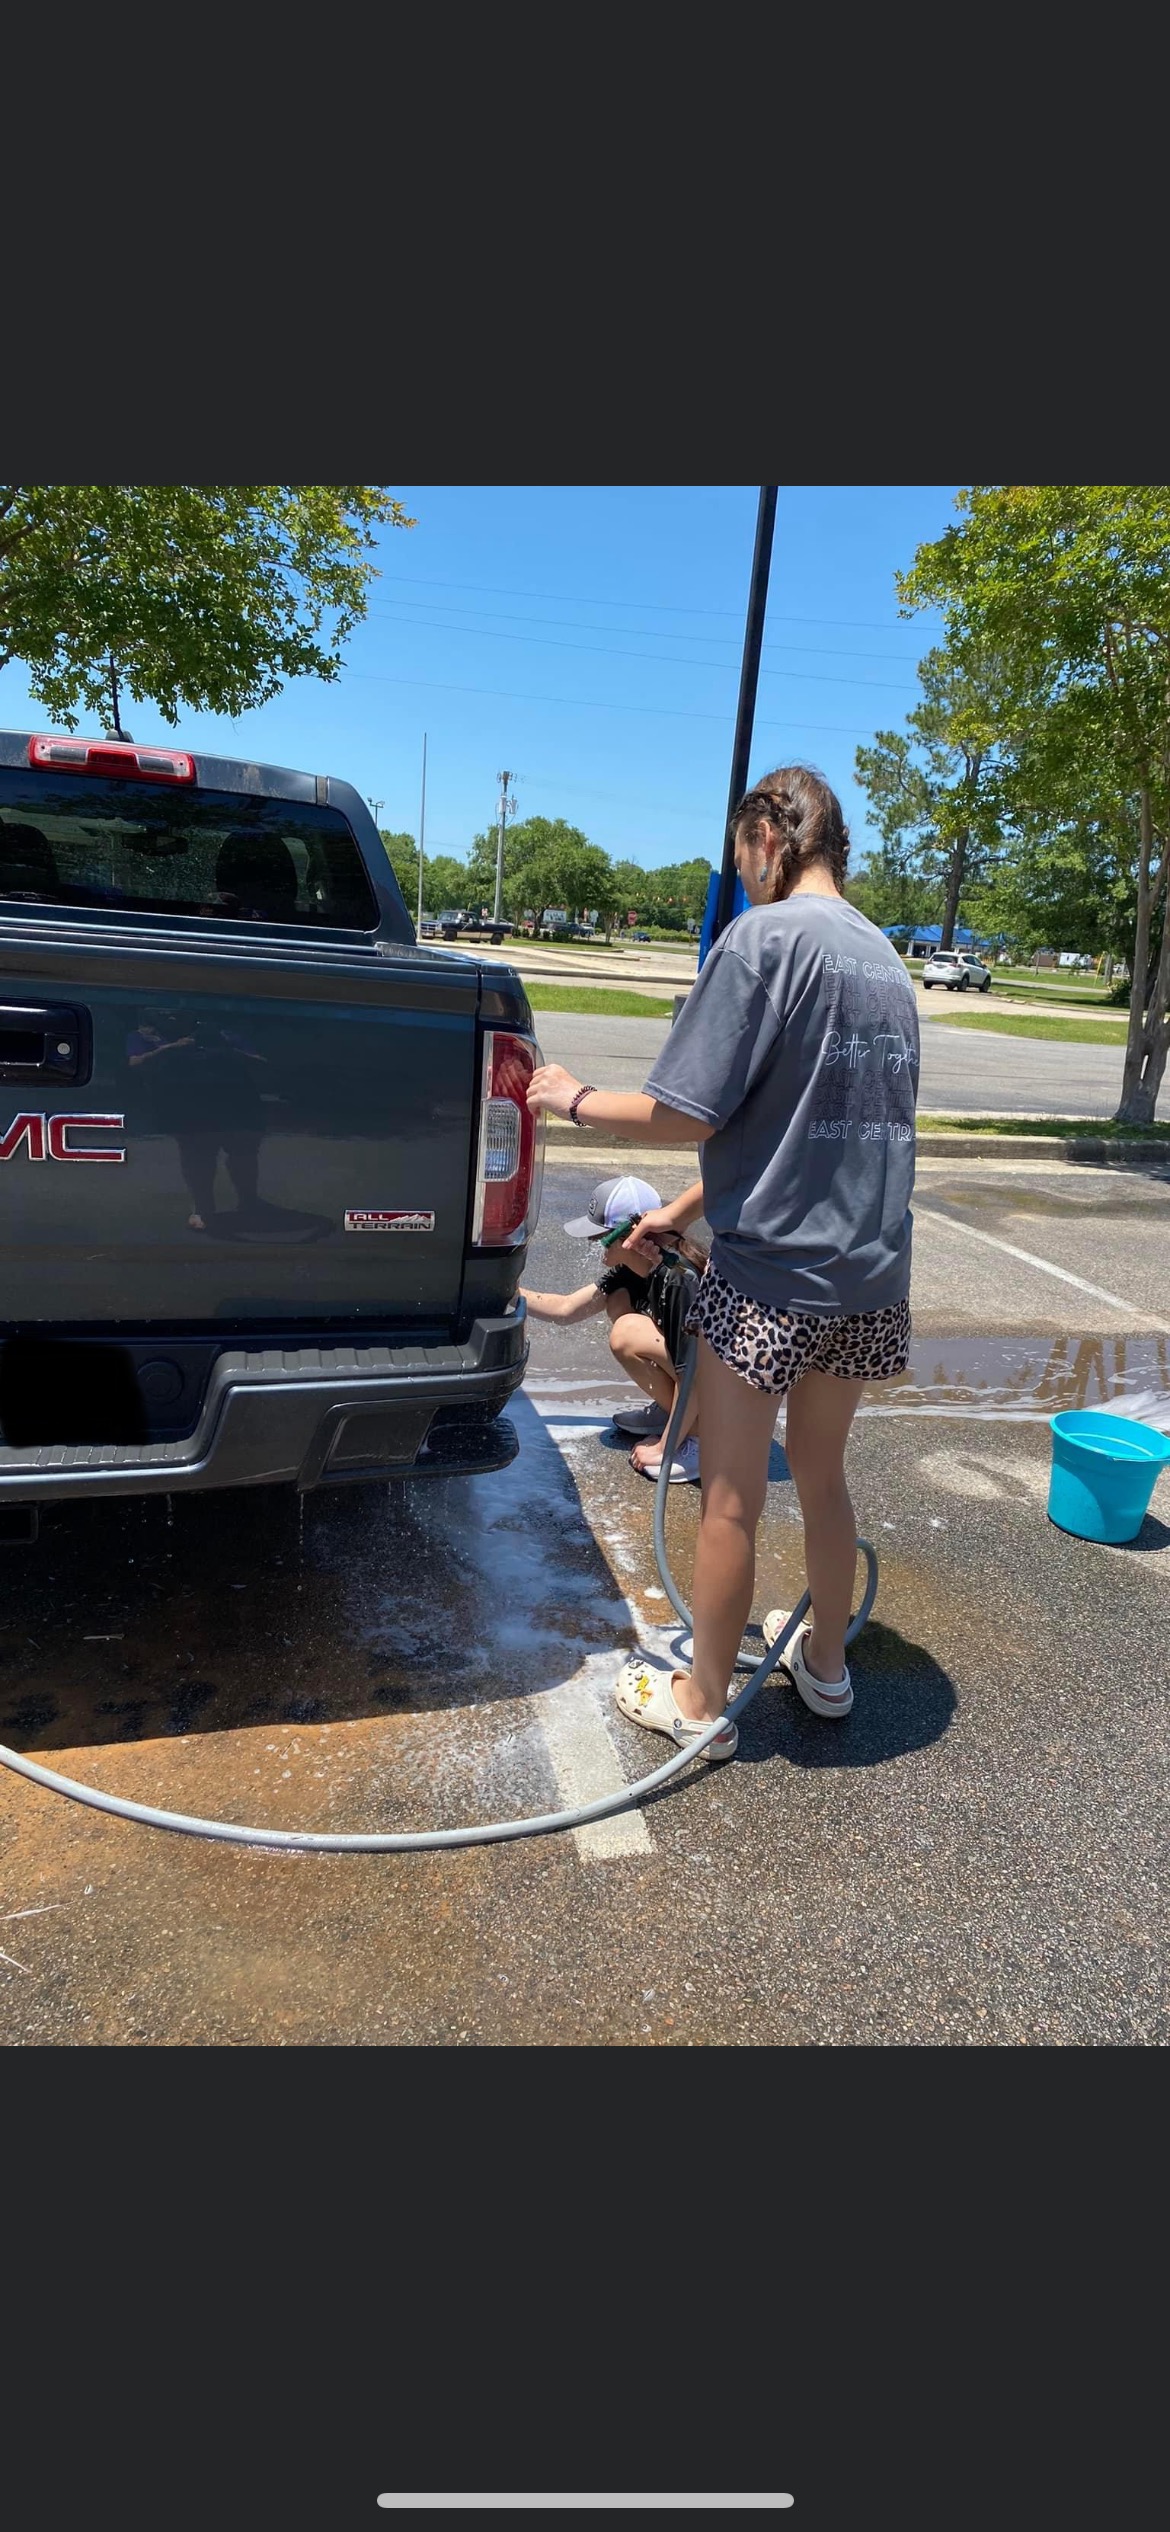 This is our team washing some cars and making some money!